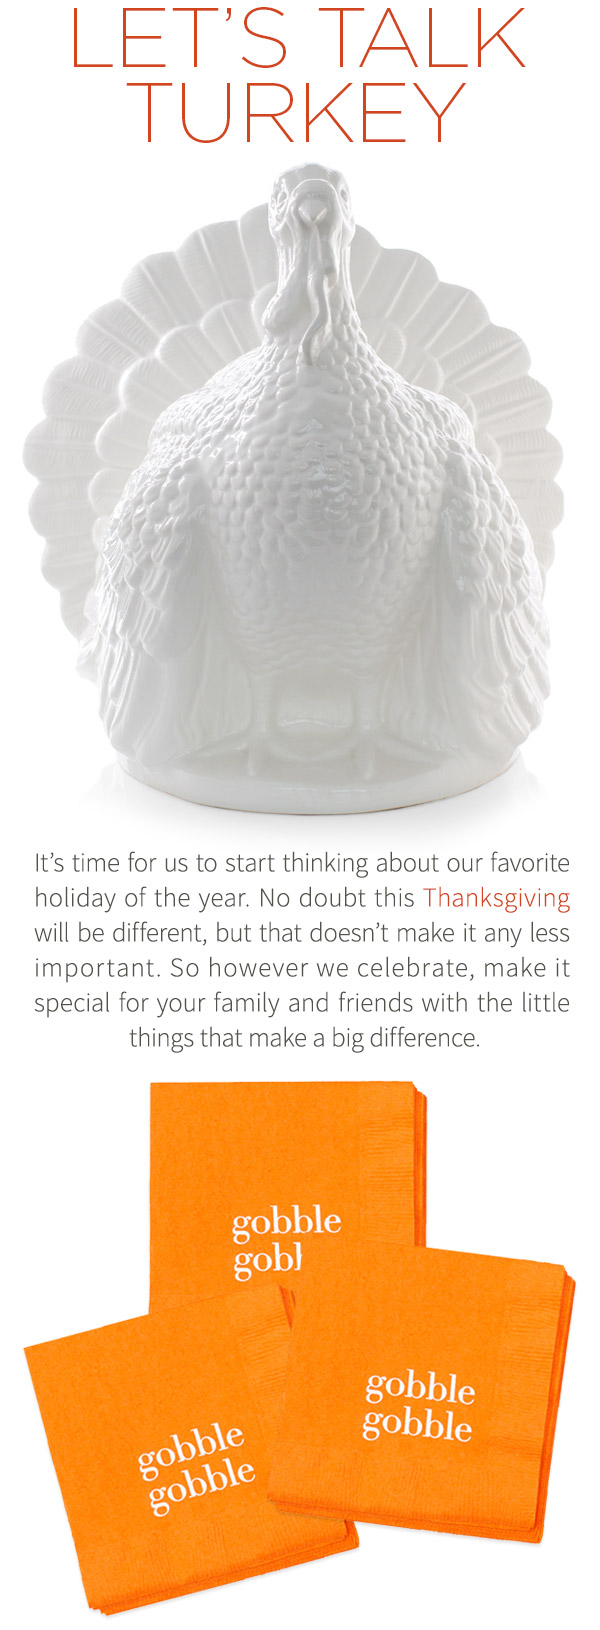 Let's Talk Turkey - It's time for us to start thinking about our favorite holiday of the year. No doubt this Thanksgiving will be different, but that doesn't make it any less important. So however we celebrate, make it special for your family and friends with the little things that make a big difference.